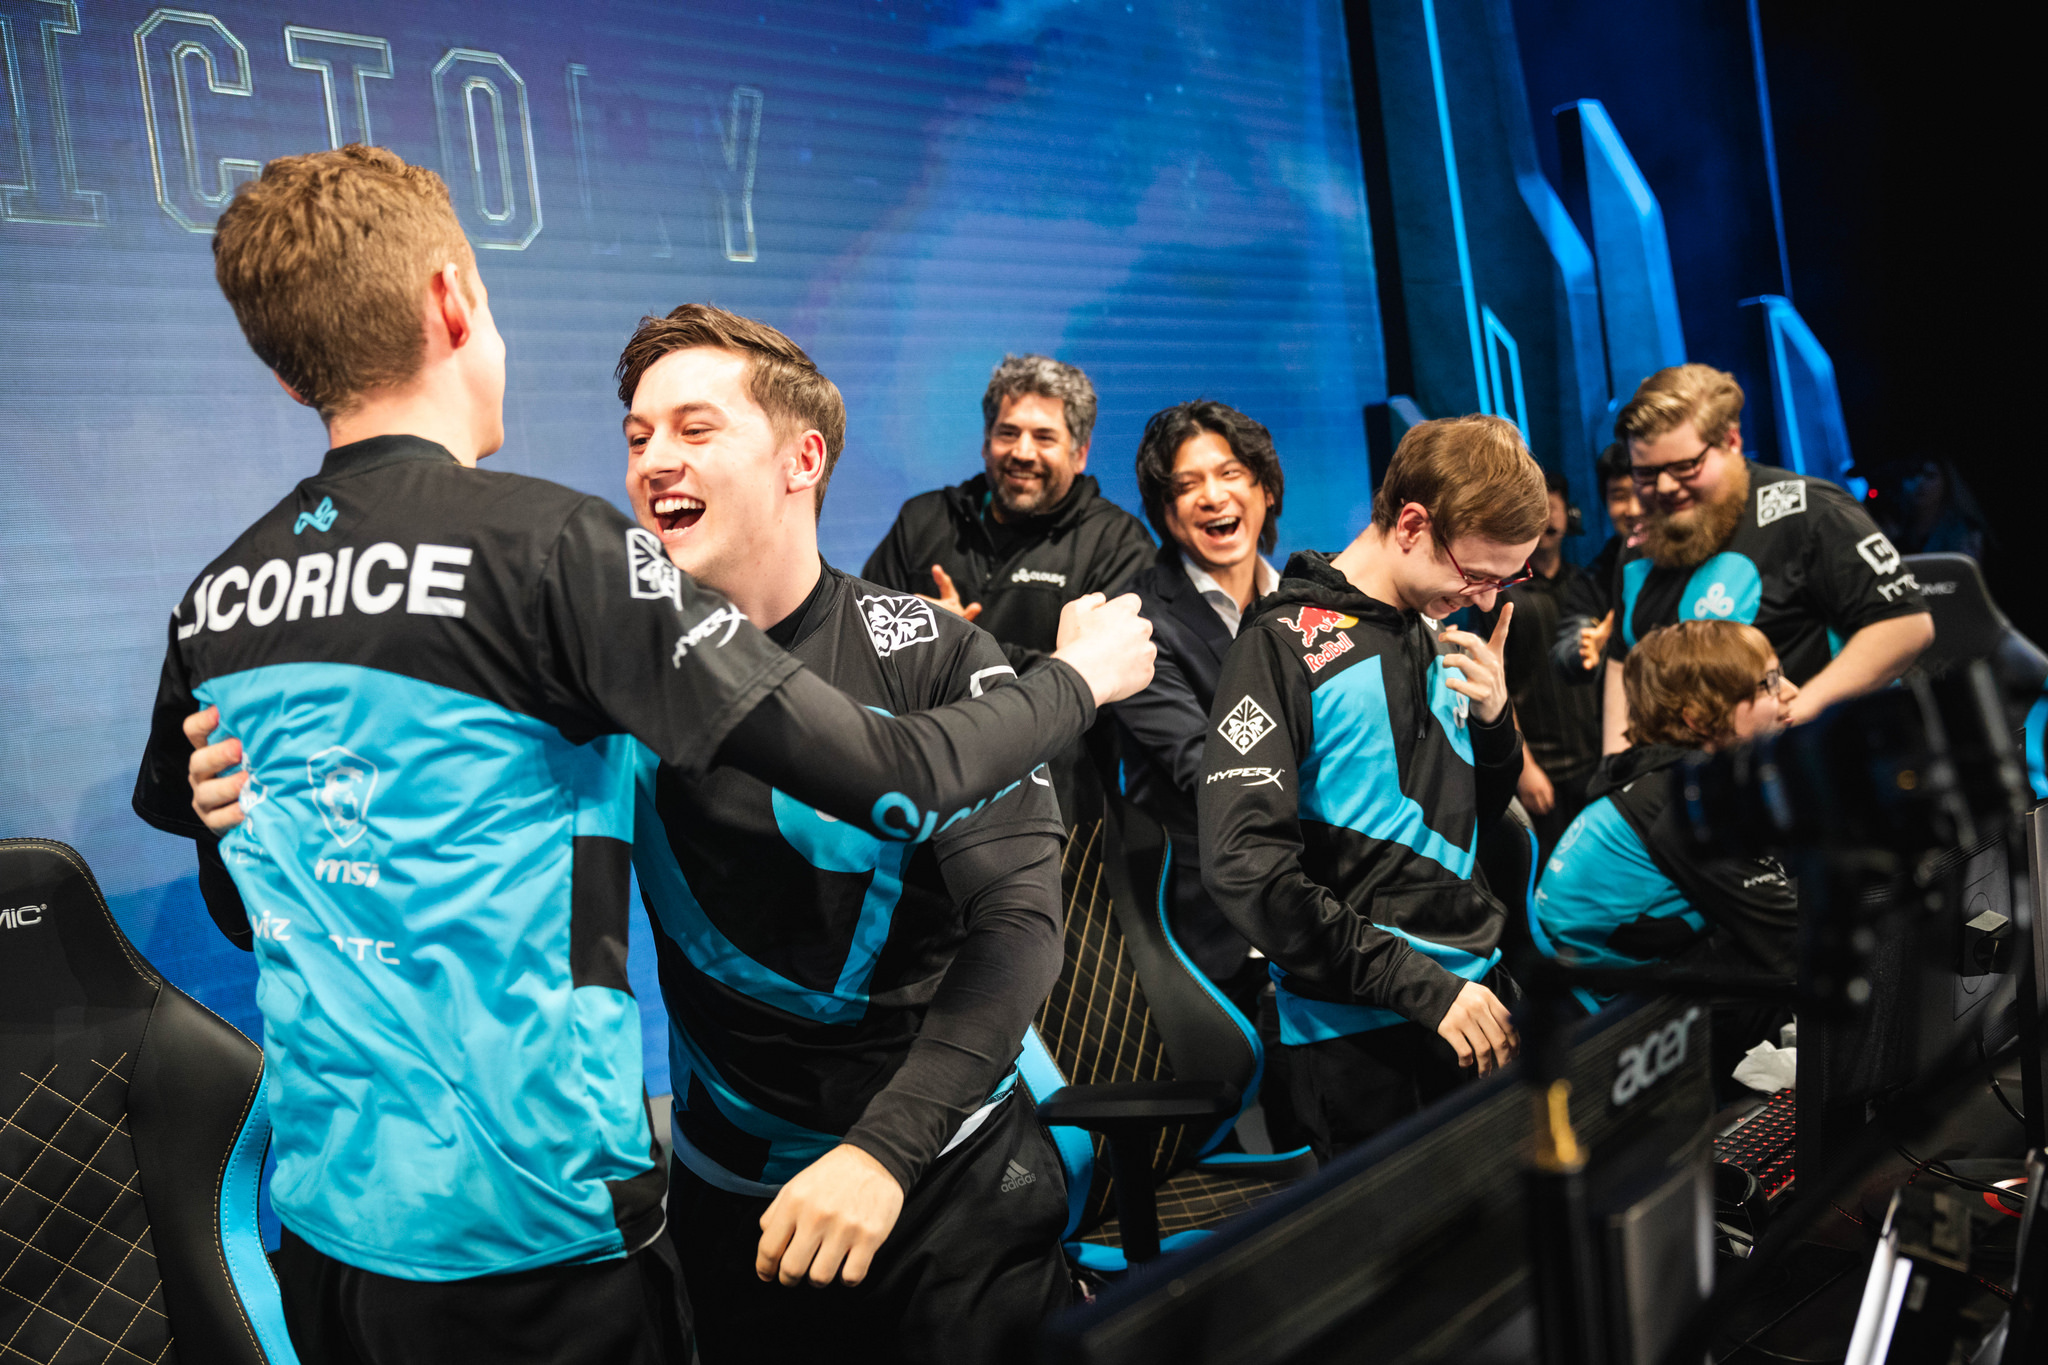 Cloud9 are once again North America's biggest hope at Worlds Dot Esports